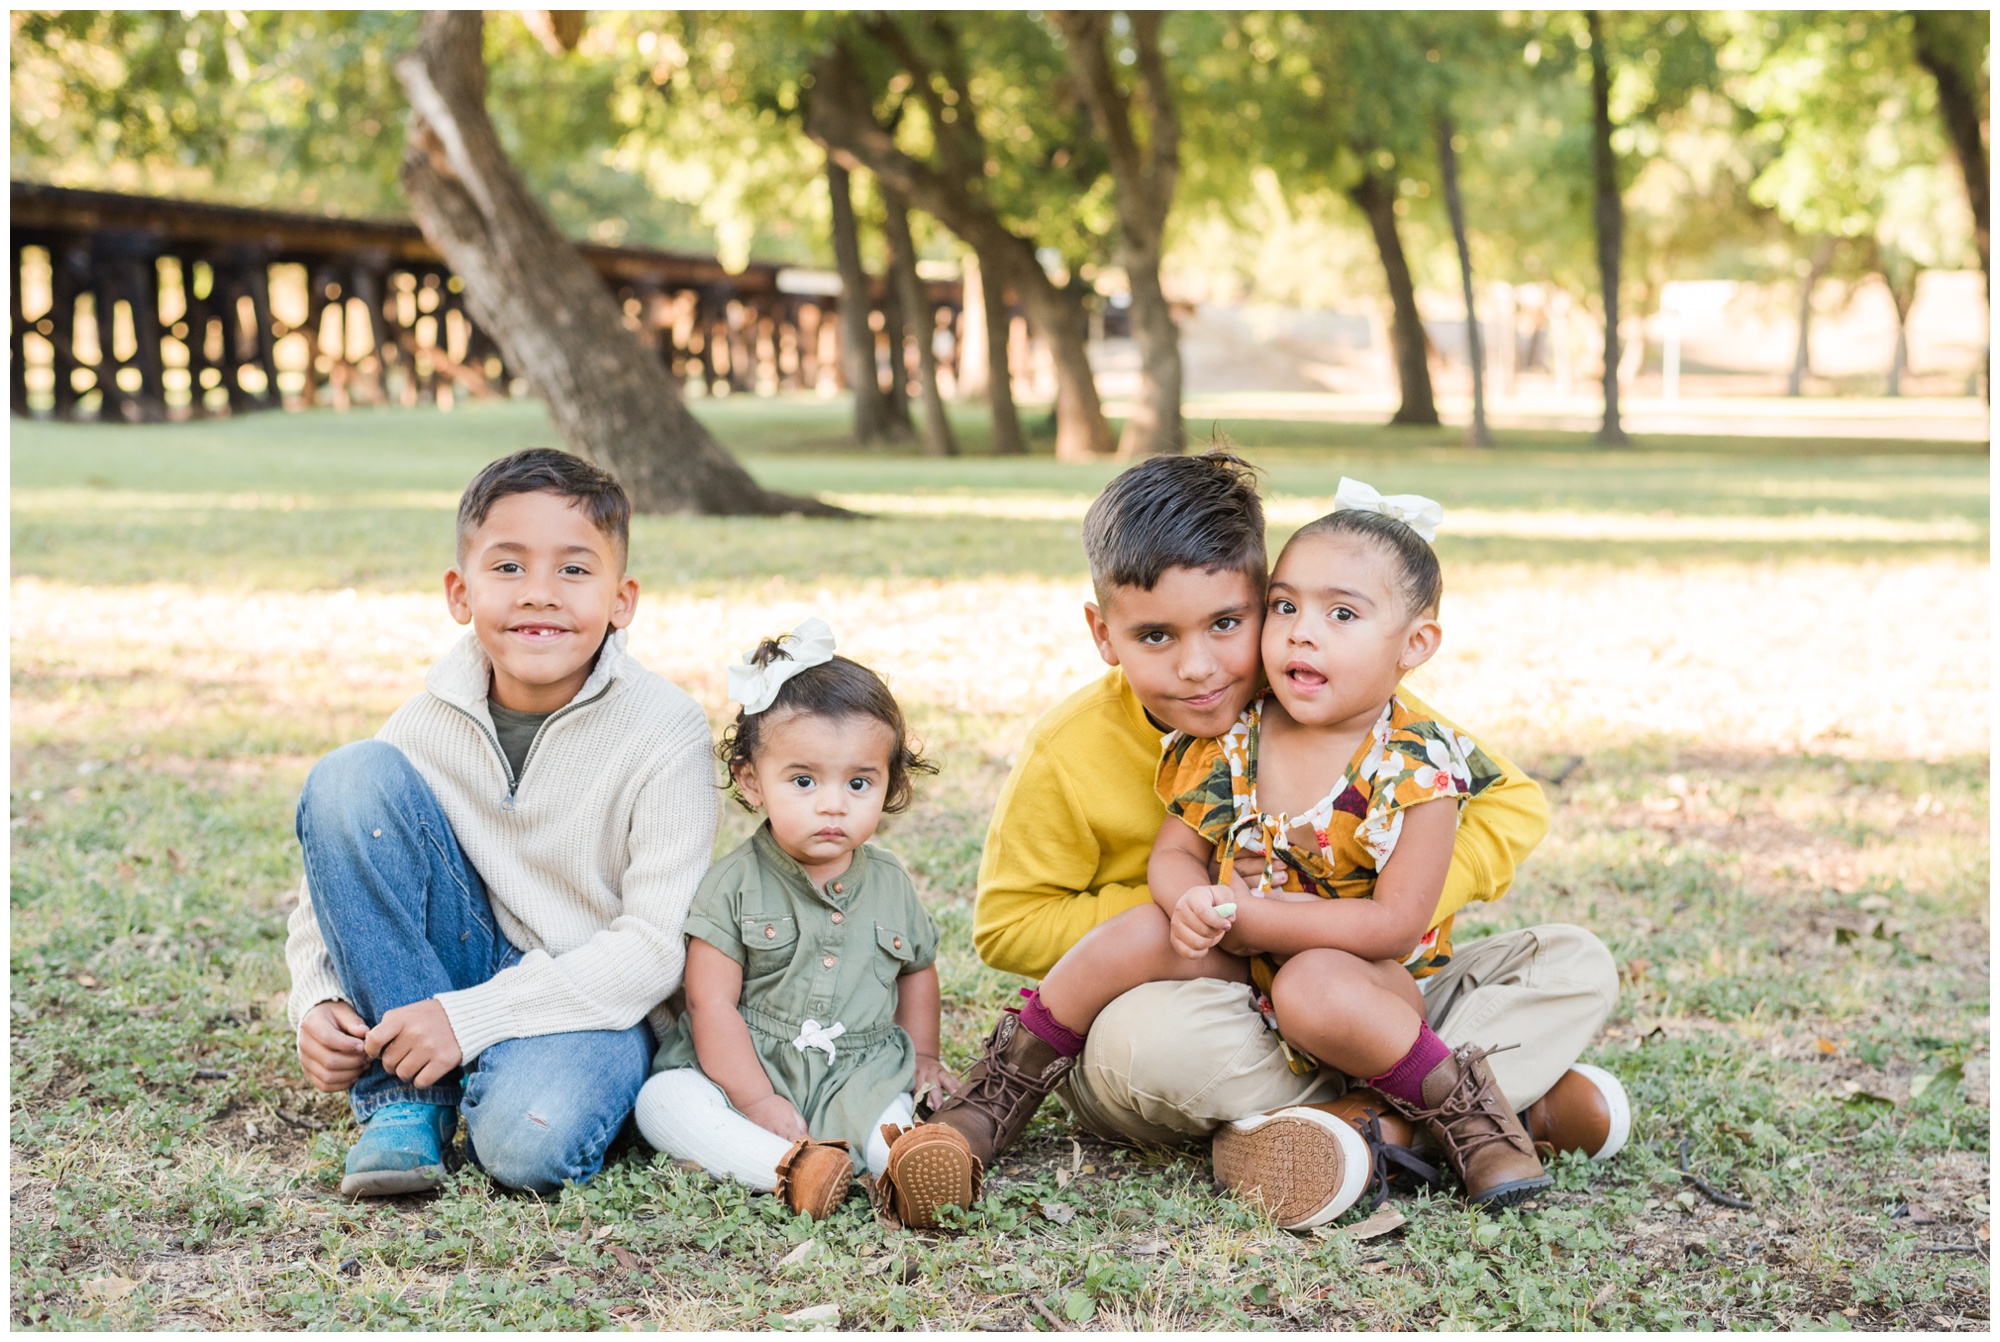 Fort Worth Family Photographer | Fort Worth Mini Sessions | Fall Mini Sessions | Fort Worth Trinity Park | Lauren Grimes Photography | 2019